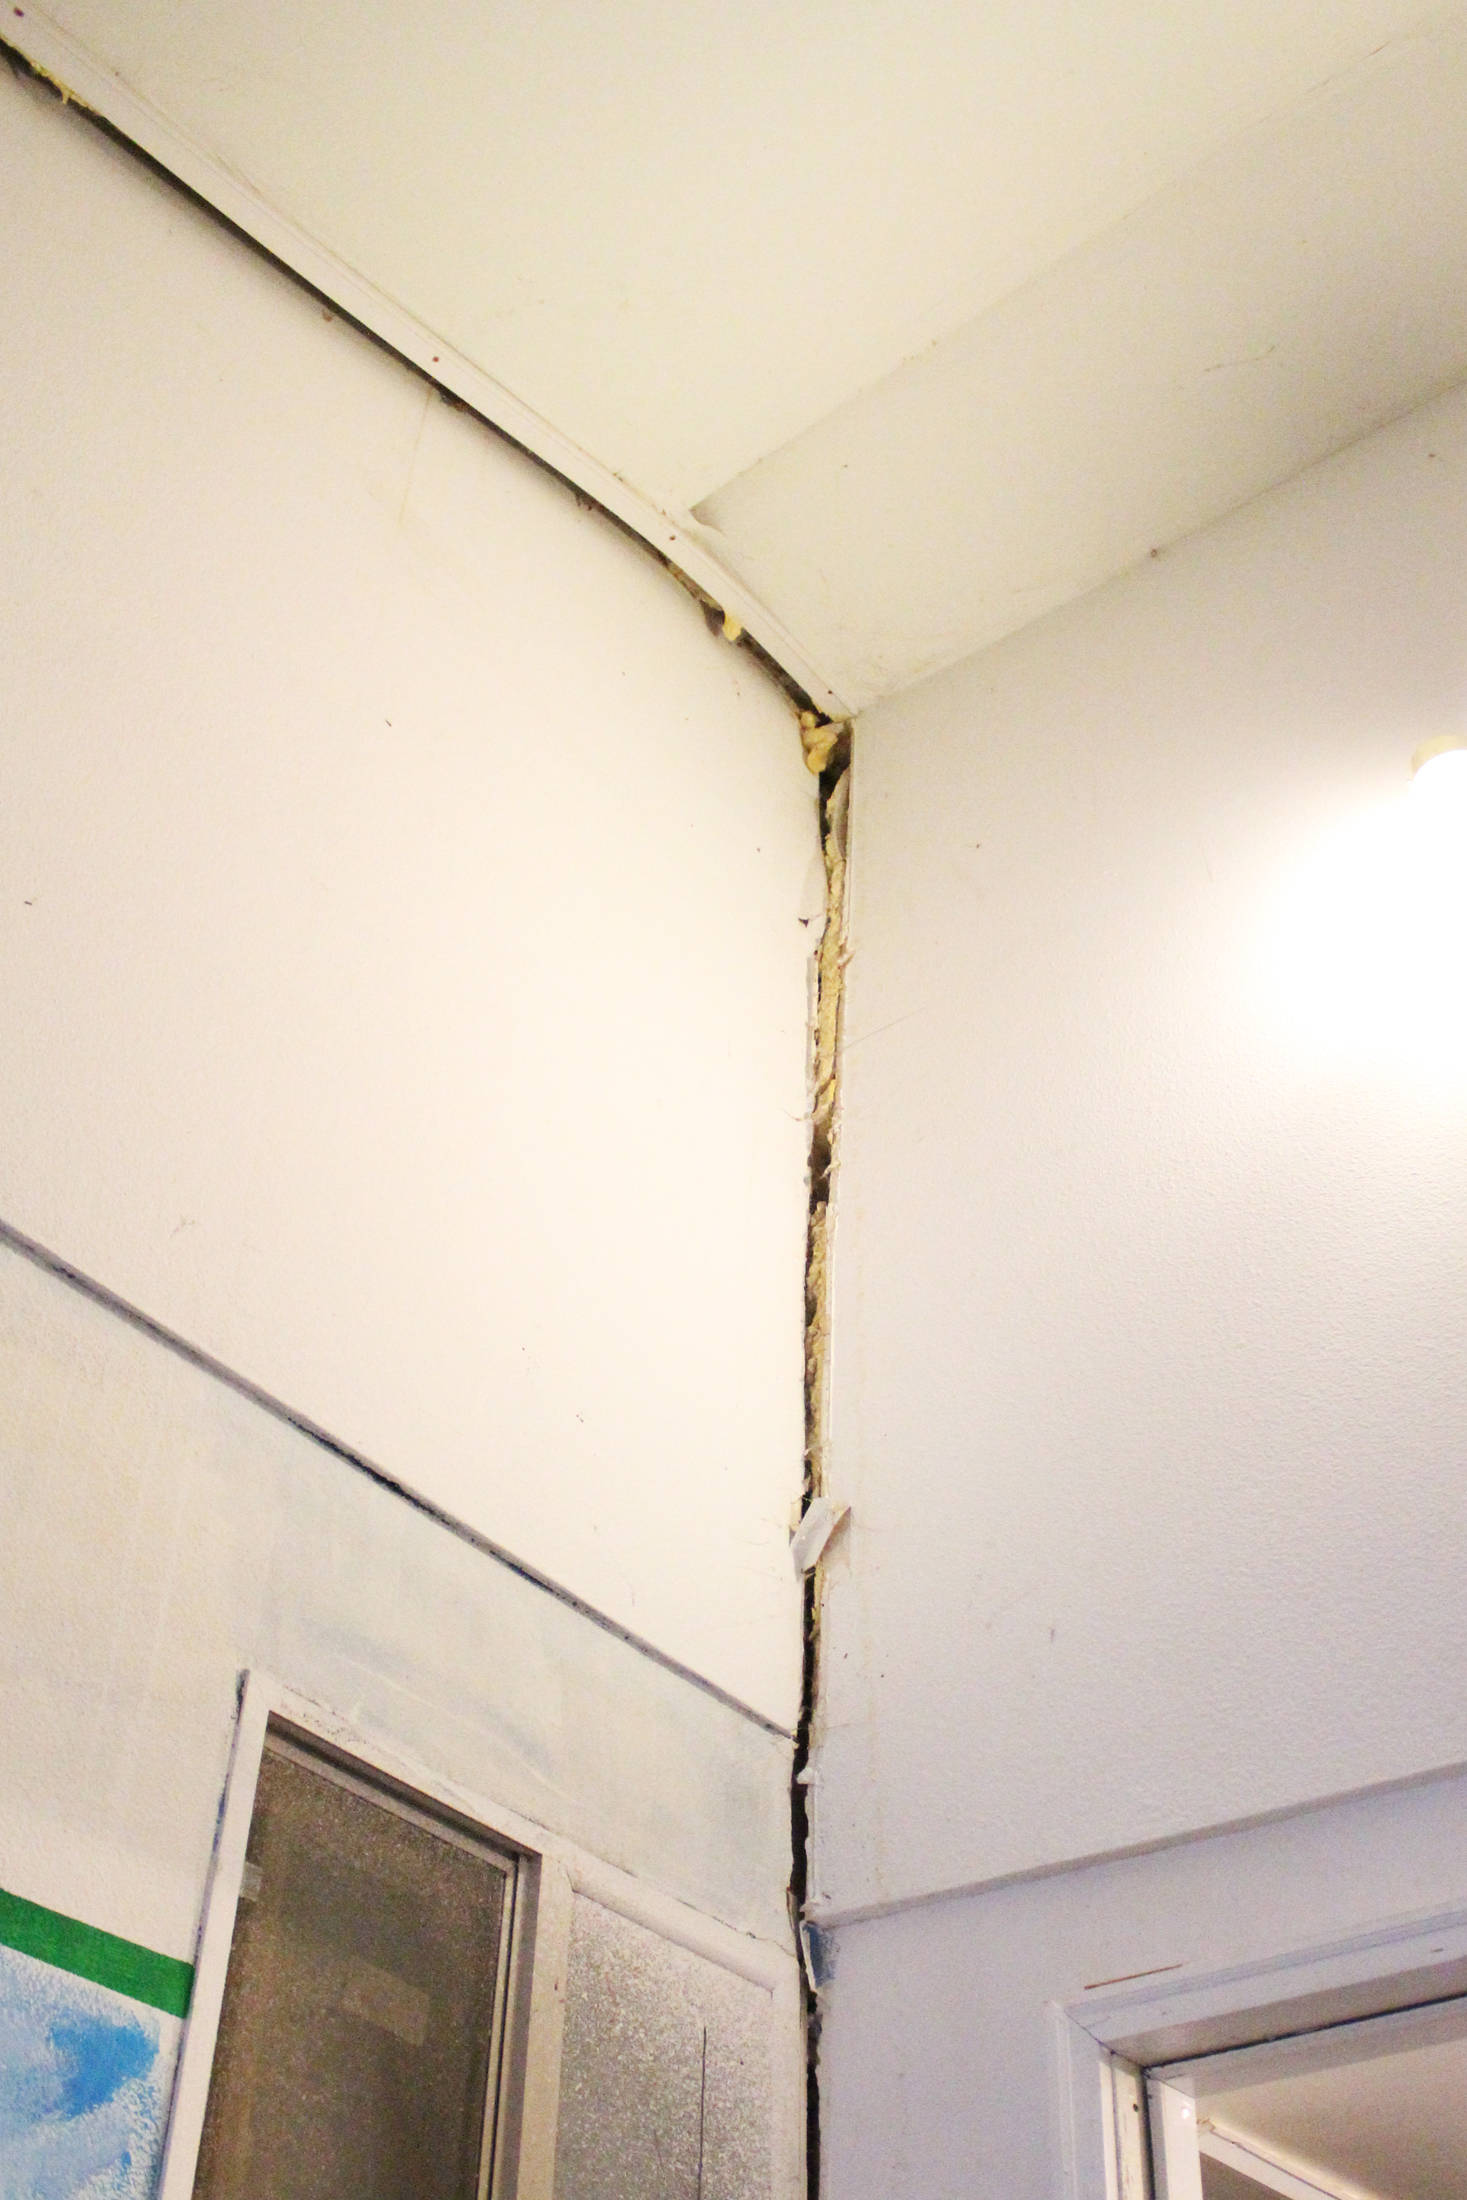 A crack runs up to the ceiling where two walls meet in one of the two buildings used to teach elementary students at Kachemak Selo School on Thursday, Aug. 30, 2018 in Kachemak Selo, Alaska. Kenai Peninsula Borough staff and representatives visited the schools to host an information meeting with parents in the community about the proposed project to build a new school on a different site. (Photo by Megan Pacer/Homer News)